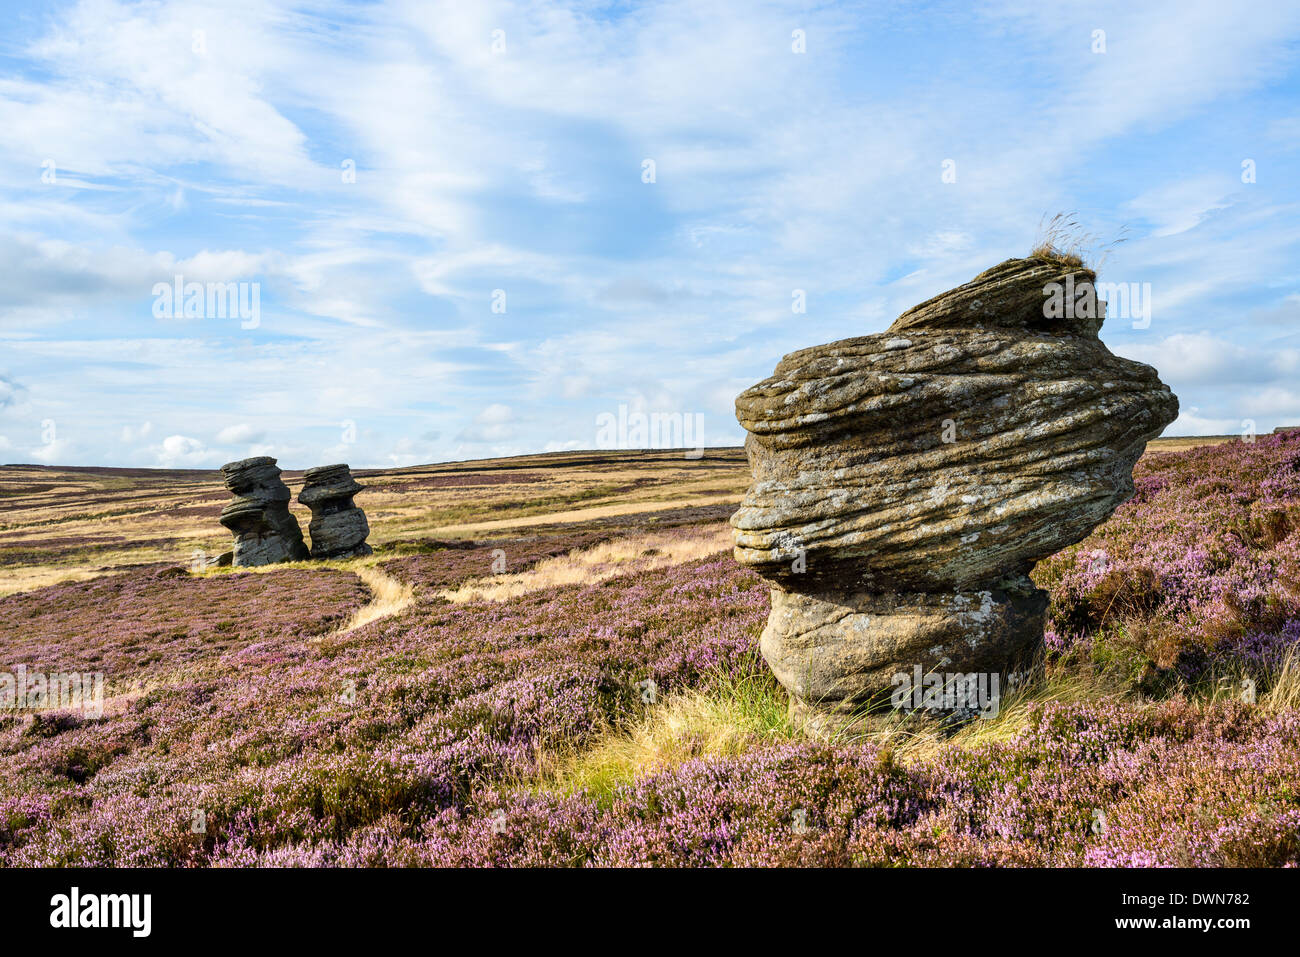 Woman and daughter, gritstone formations on heather covered moors, Upper Nidderdale, North Yorkshire, Yorkshire, England, UK Stock Photo